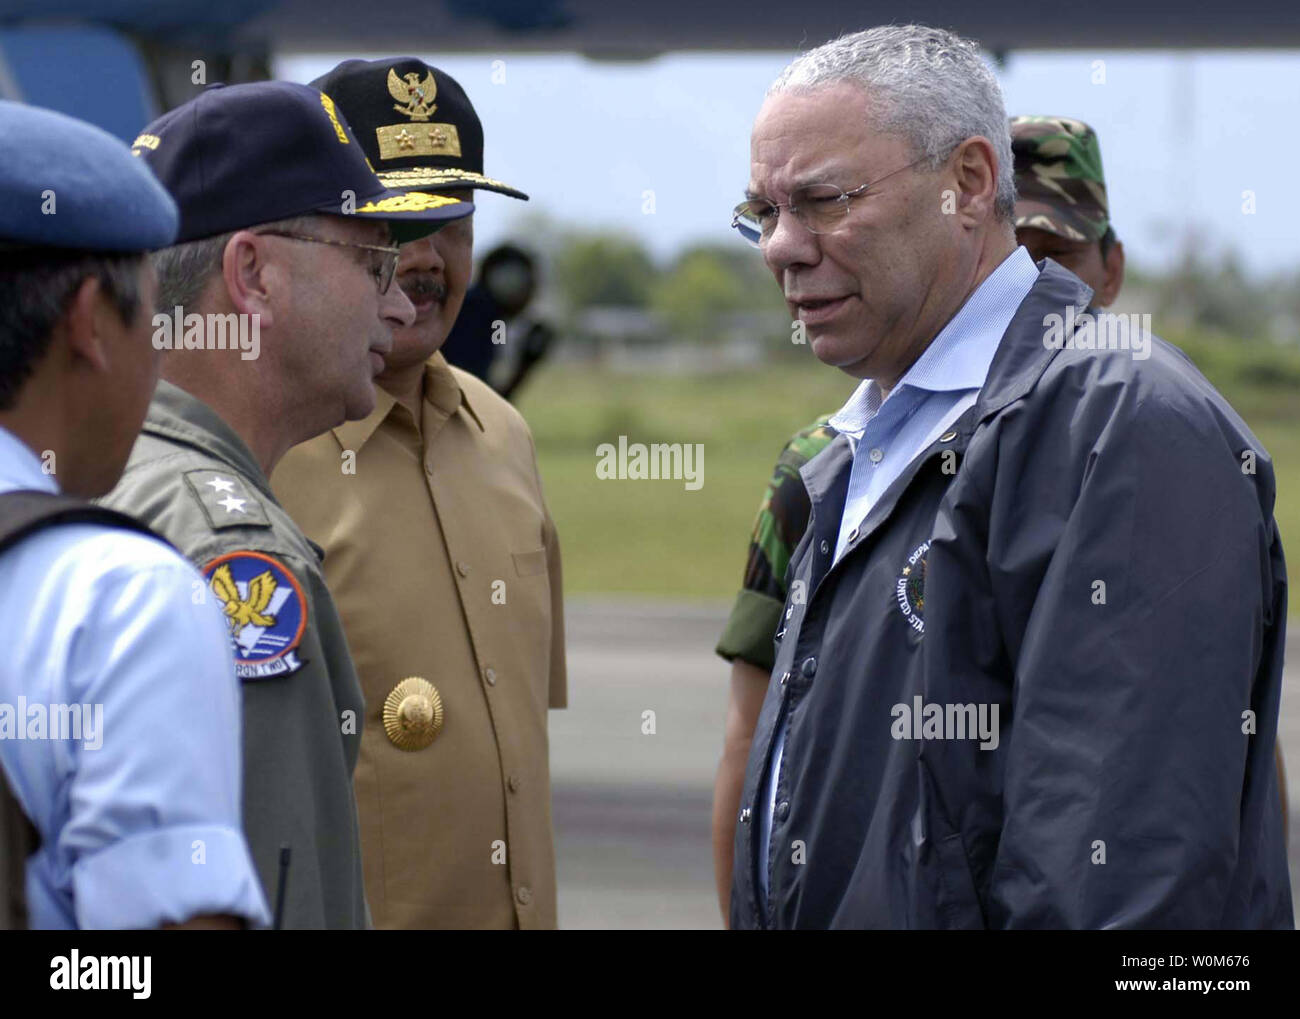 Secretary of State Colin Powell greets U.S. Navy air crewmen on the runway at Sultan Iskandar Muda Airport in Aceh, Sumatra, Indonesia on January 5, 2005.  Powell toured the area devastated by the tsunami.  (UPI Photo/Benjamin D. Glass/Navy) Stock Photo